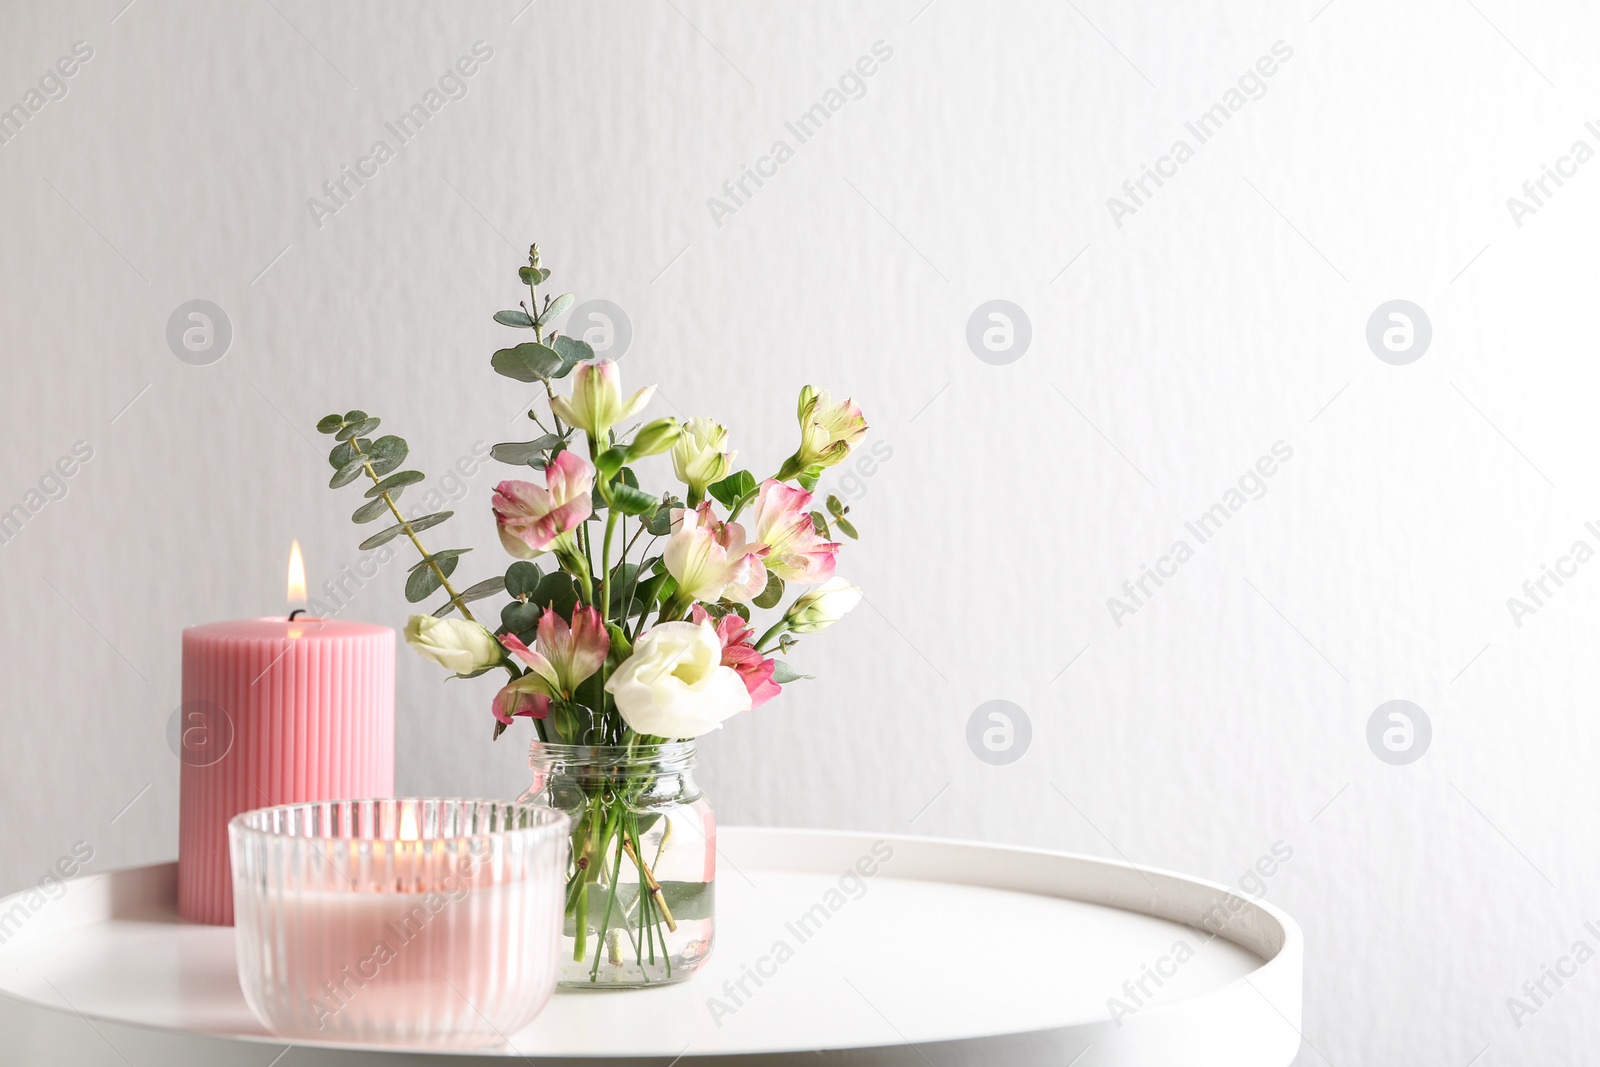 Photo of Stylish tender composition with burning candles and flowers on white table against light background, space for text. Cozy interior element